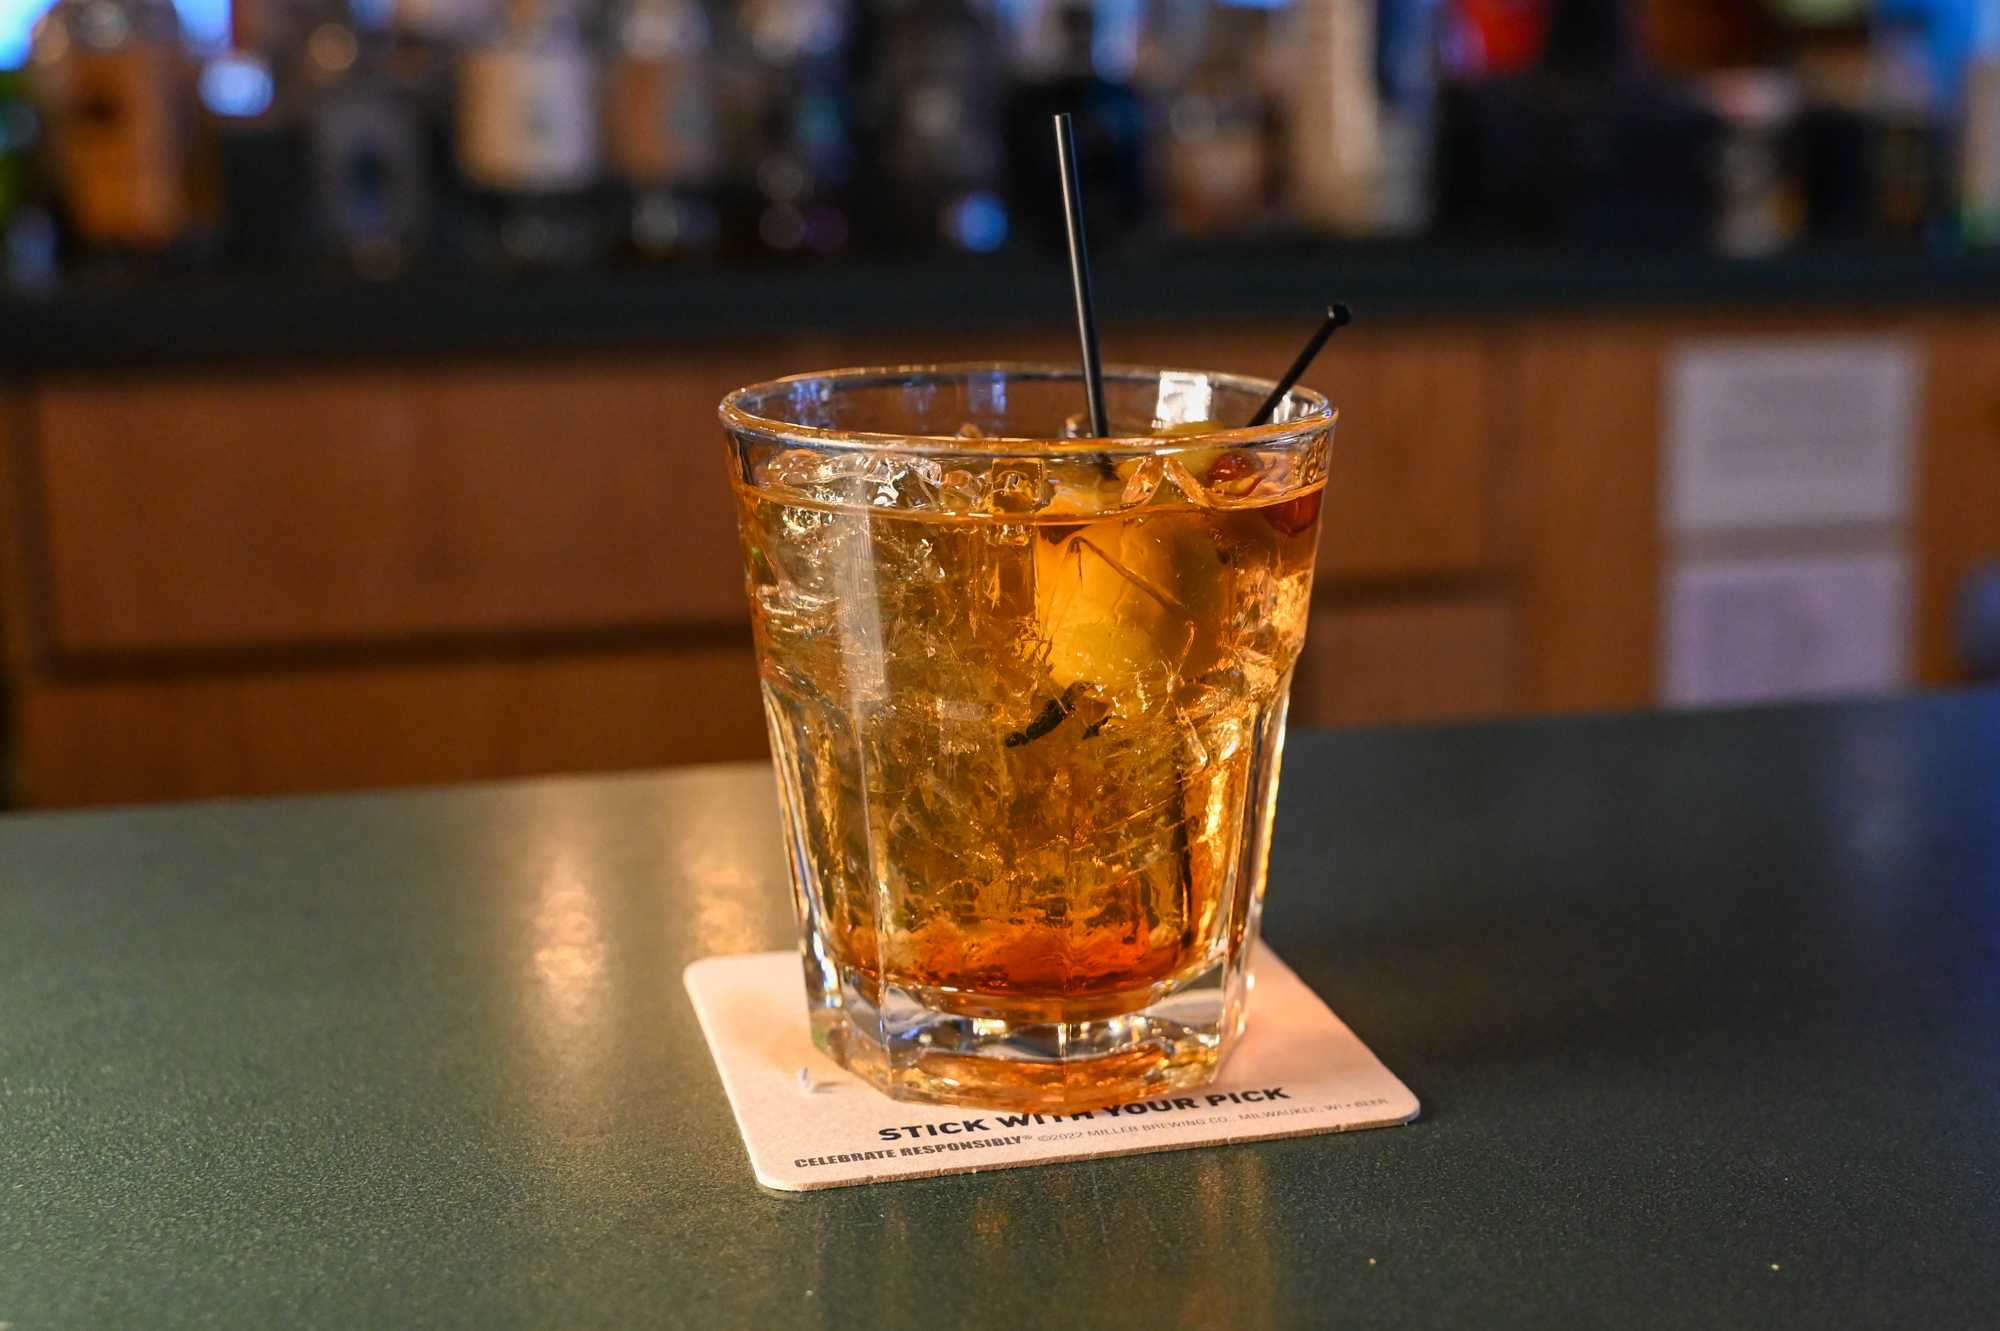 Awaken your taste buds with an Old Fashioned